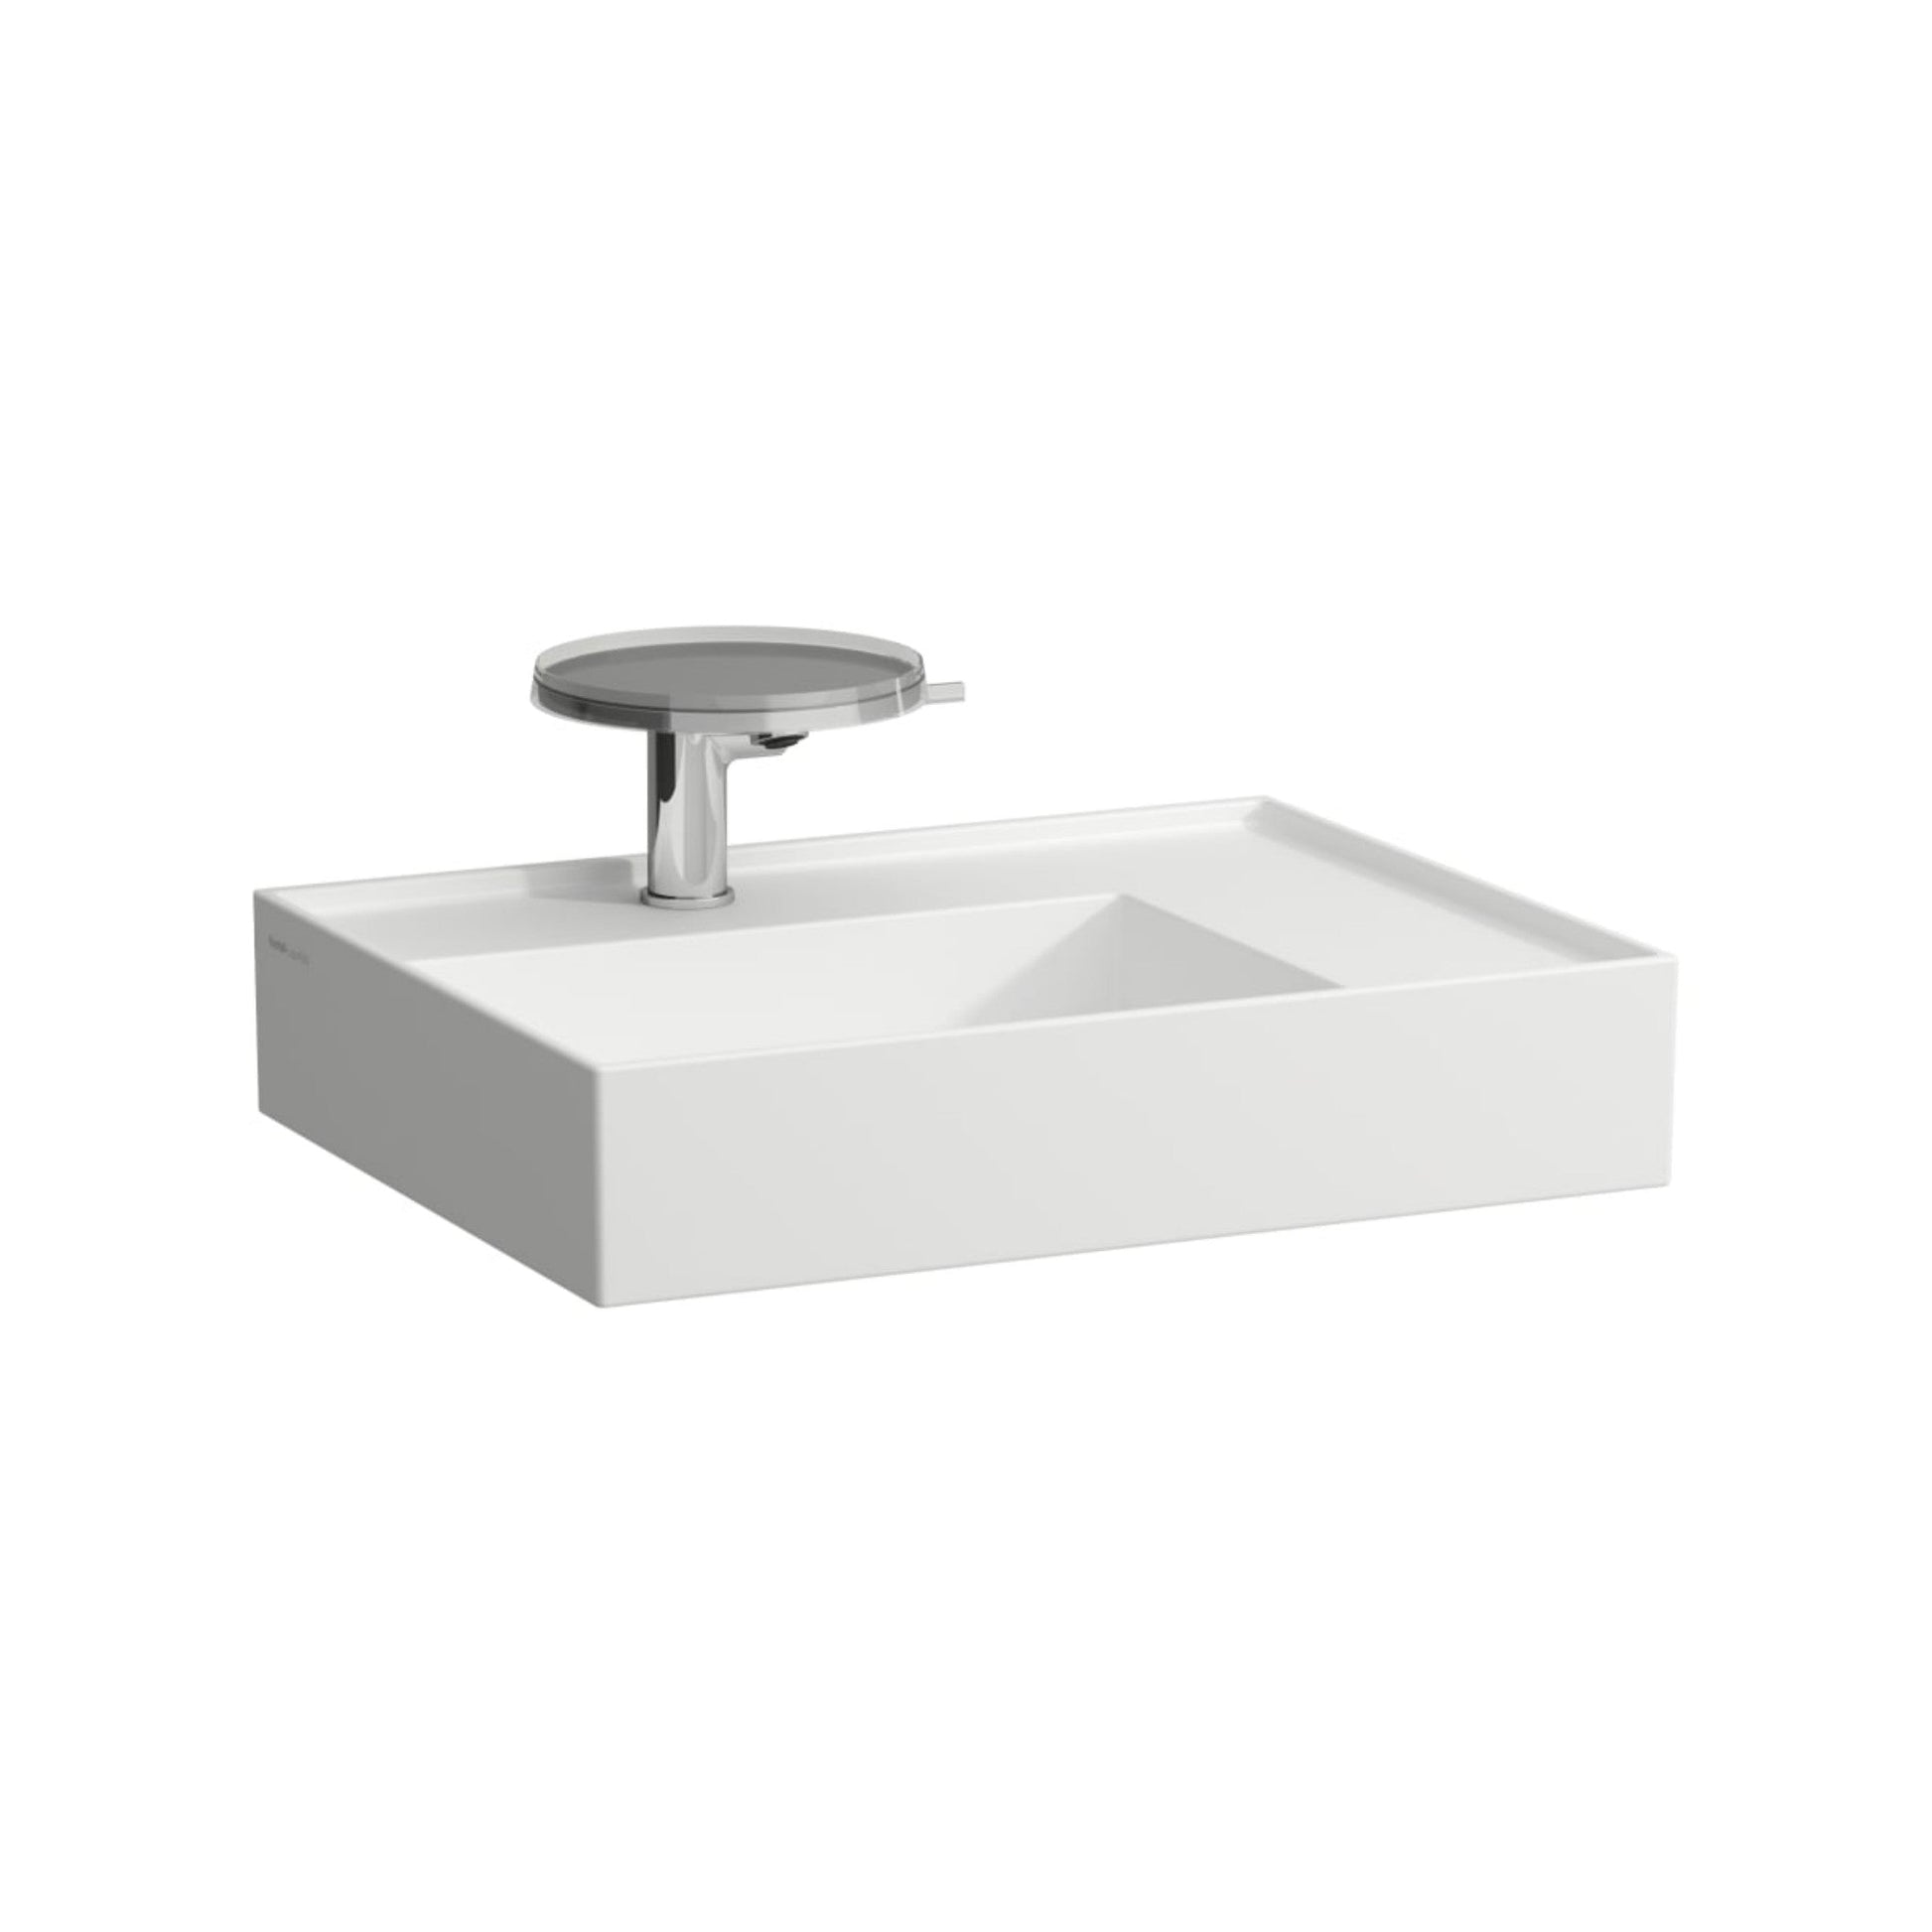 Laufen Kartell 24" x 18" Matte White Countertop Shelf-Right Bathroom Sink With Faucet Hole